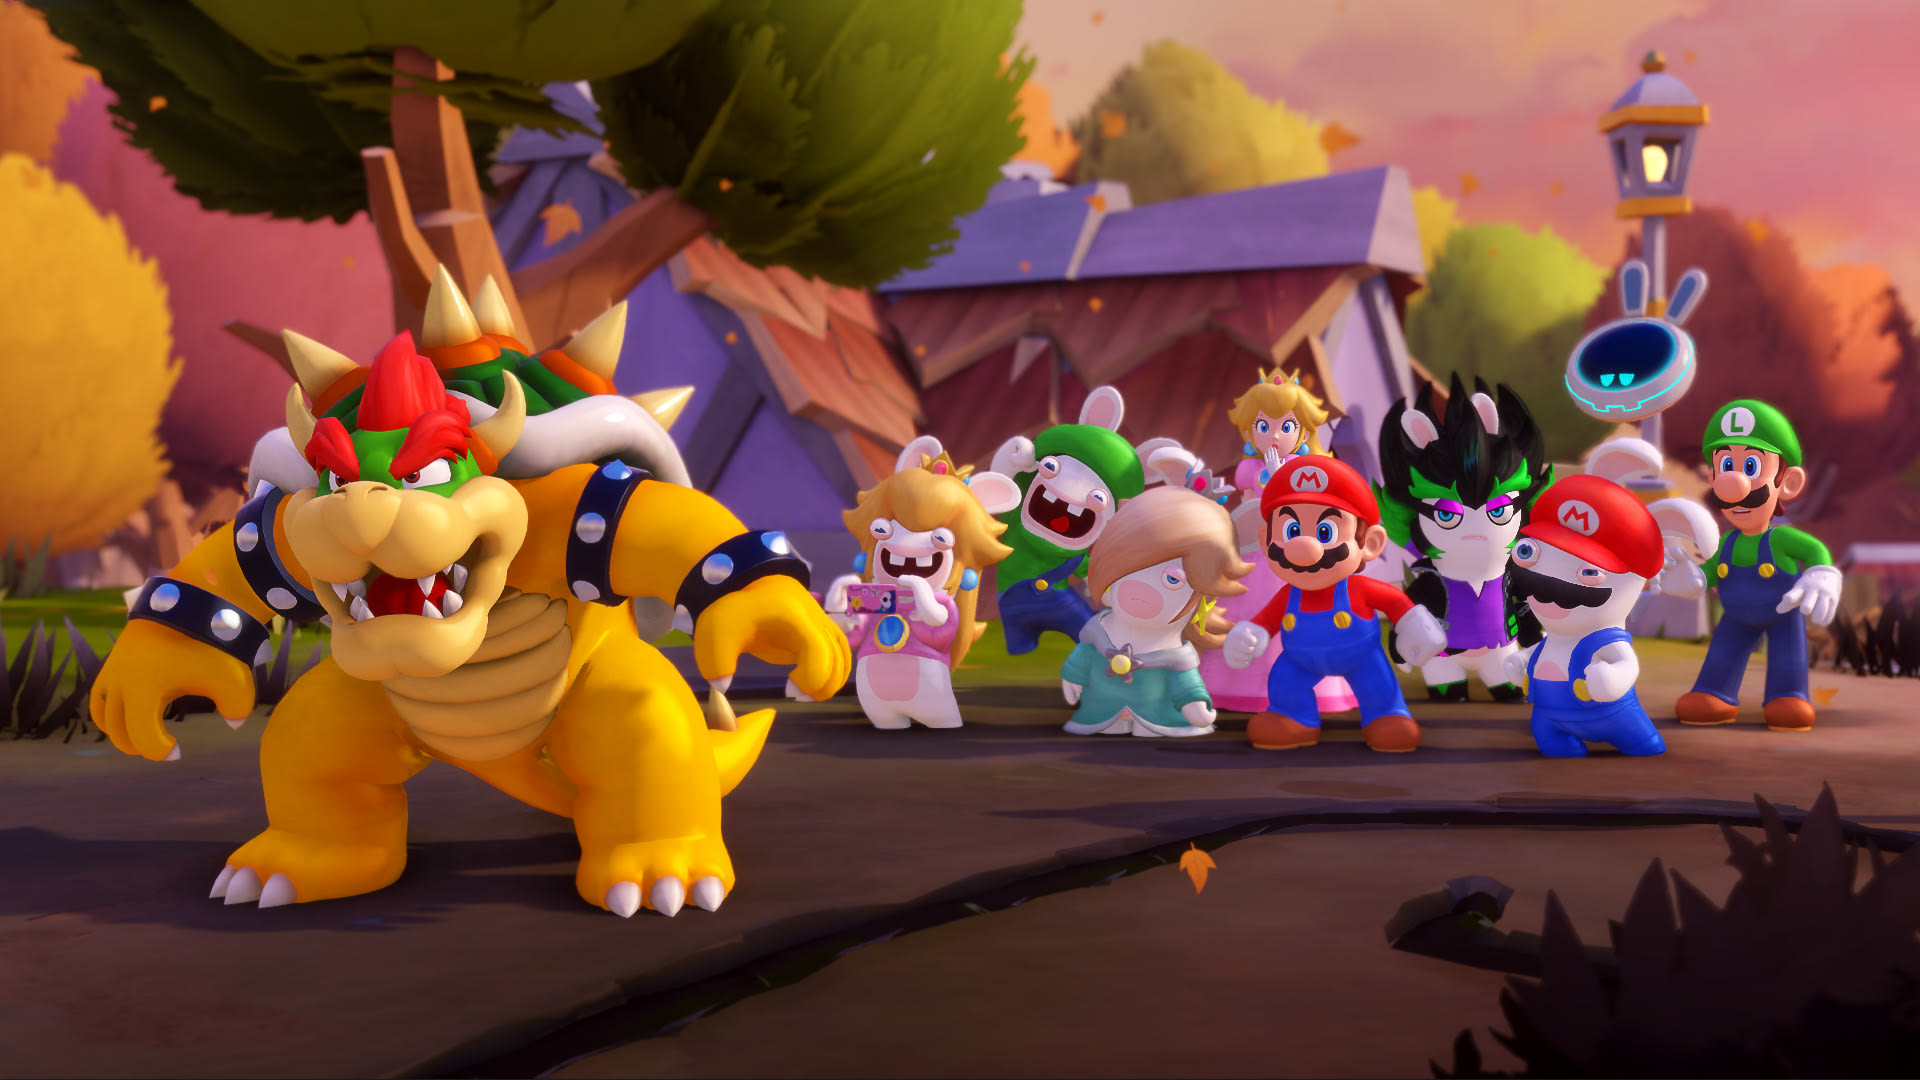 4080x1080 Resolution Bowser Mario Rabbids Sparks Of Hope 4080x1080 Resolution Wallpaper